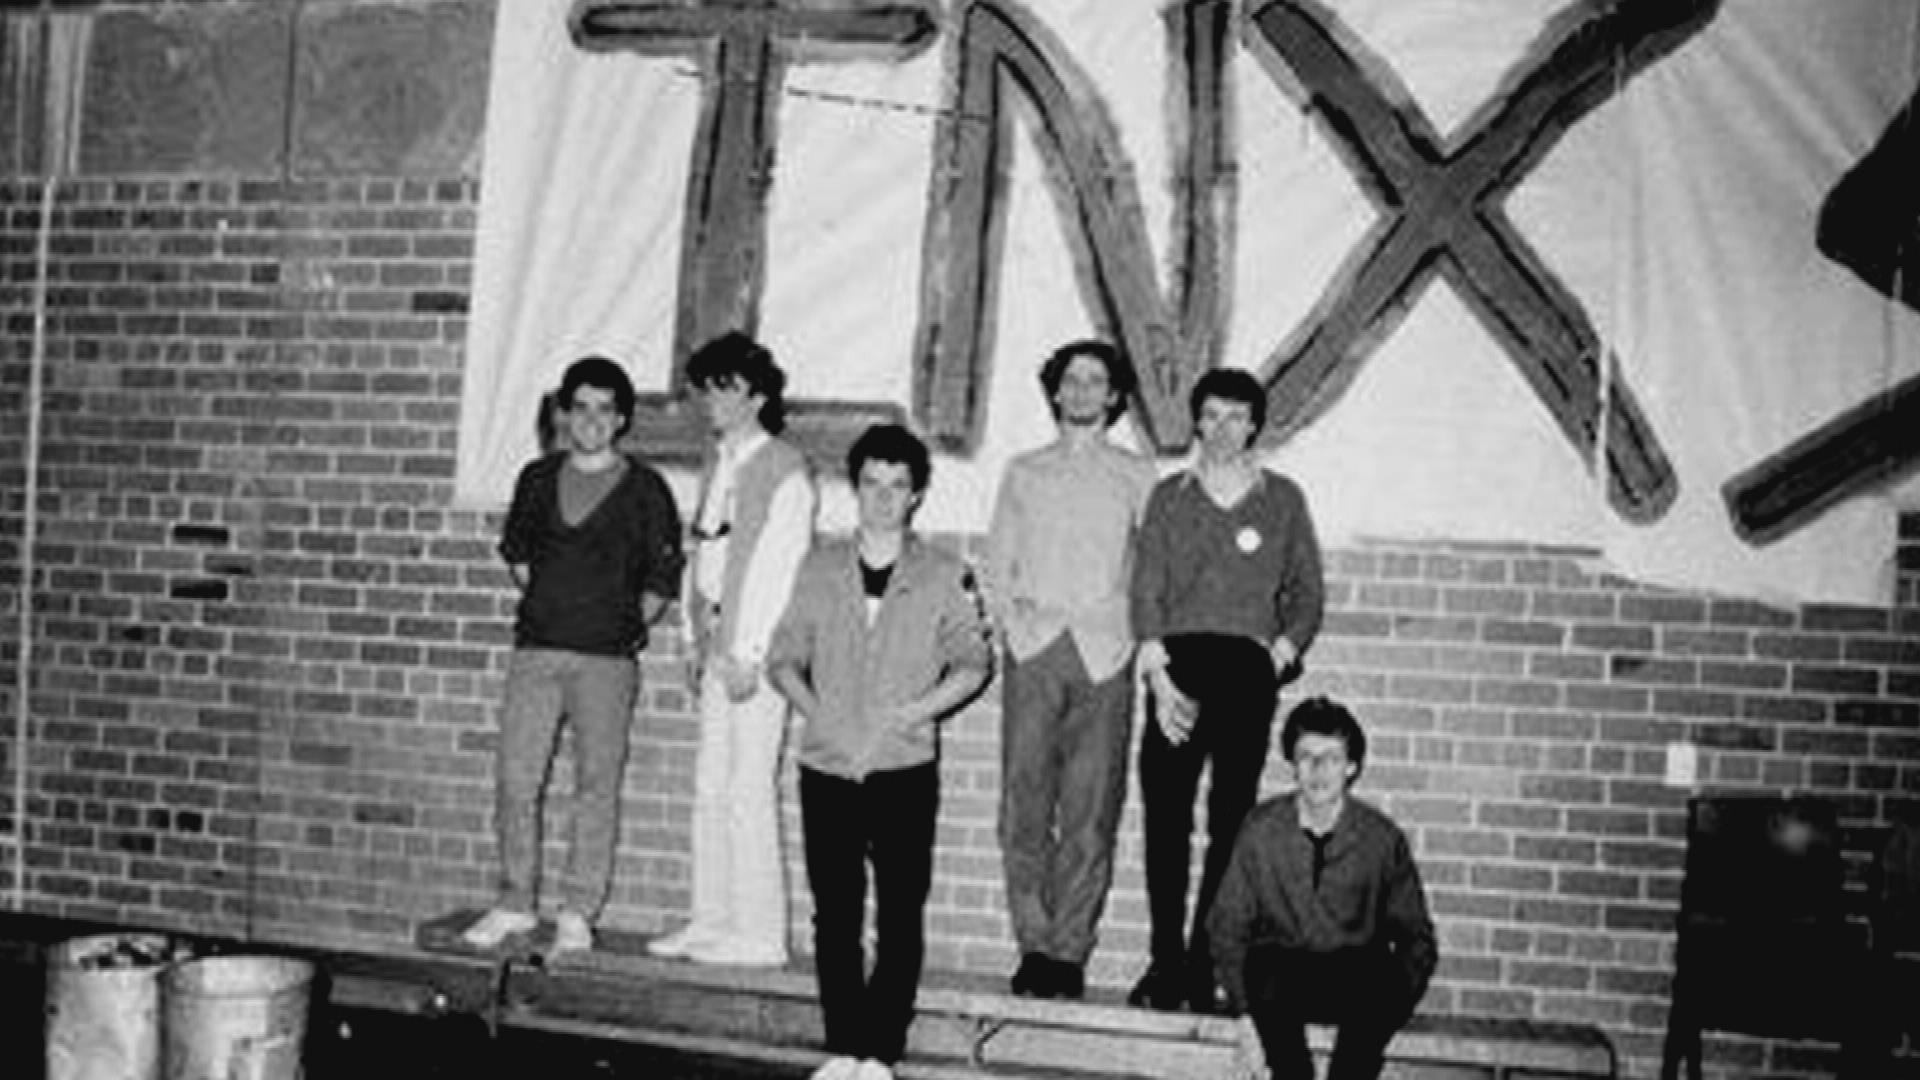 school where inxs formed more than 40 years ago long overdue for upgrade